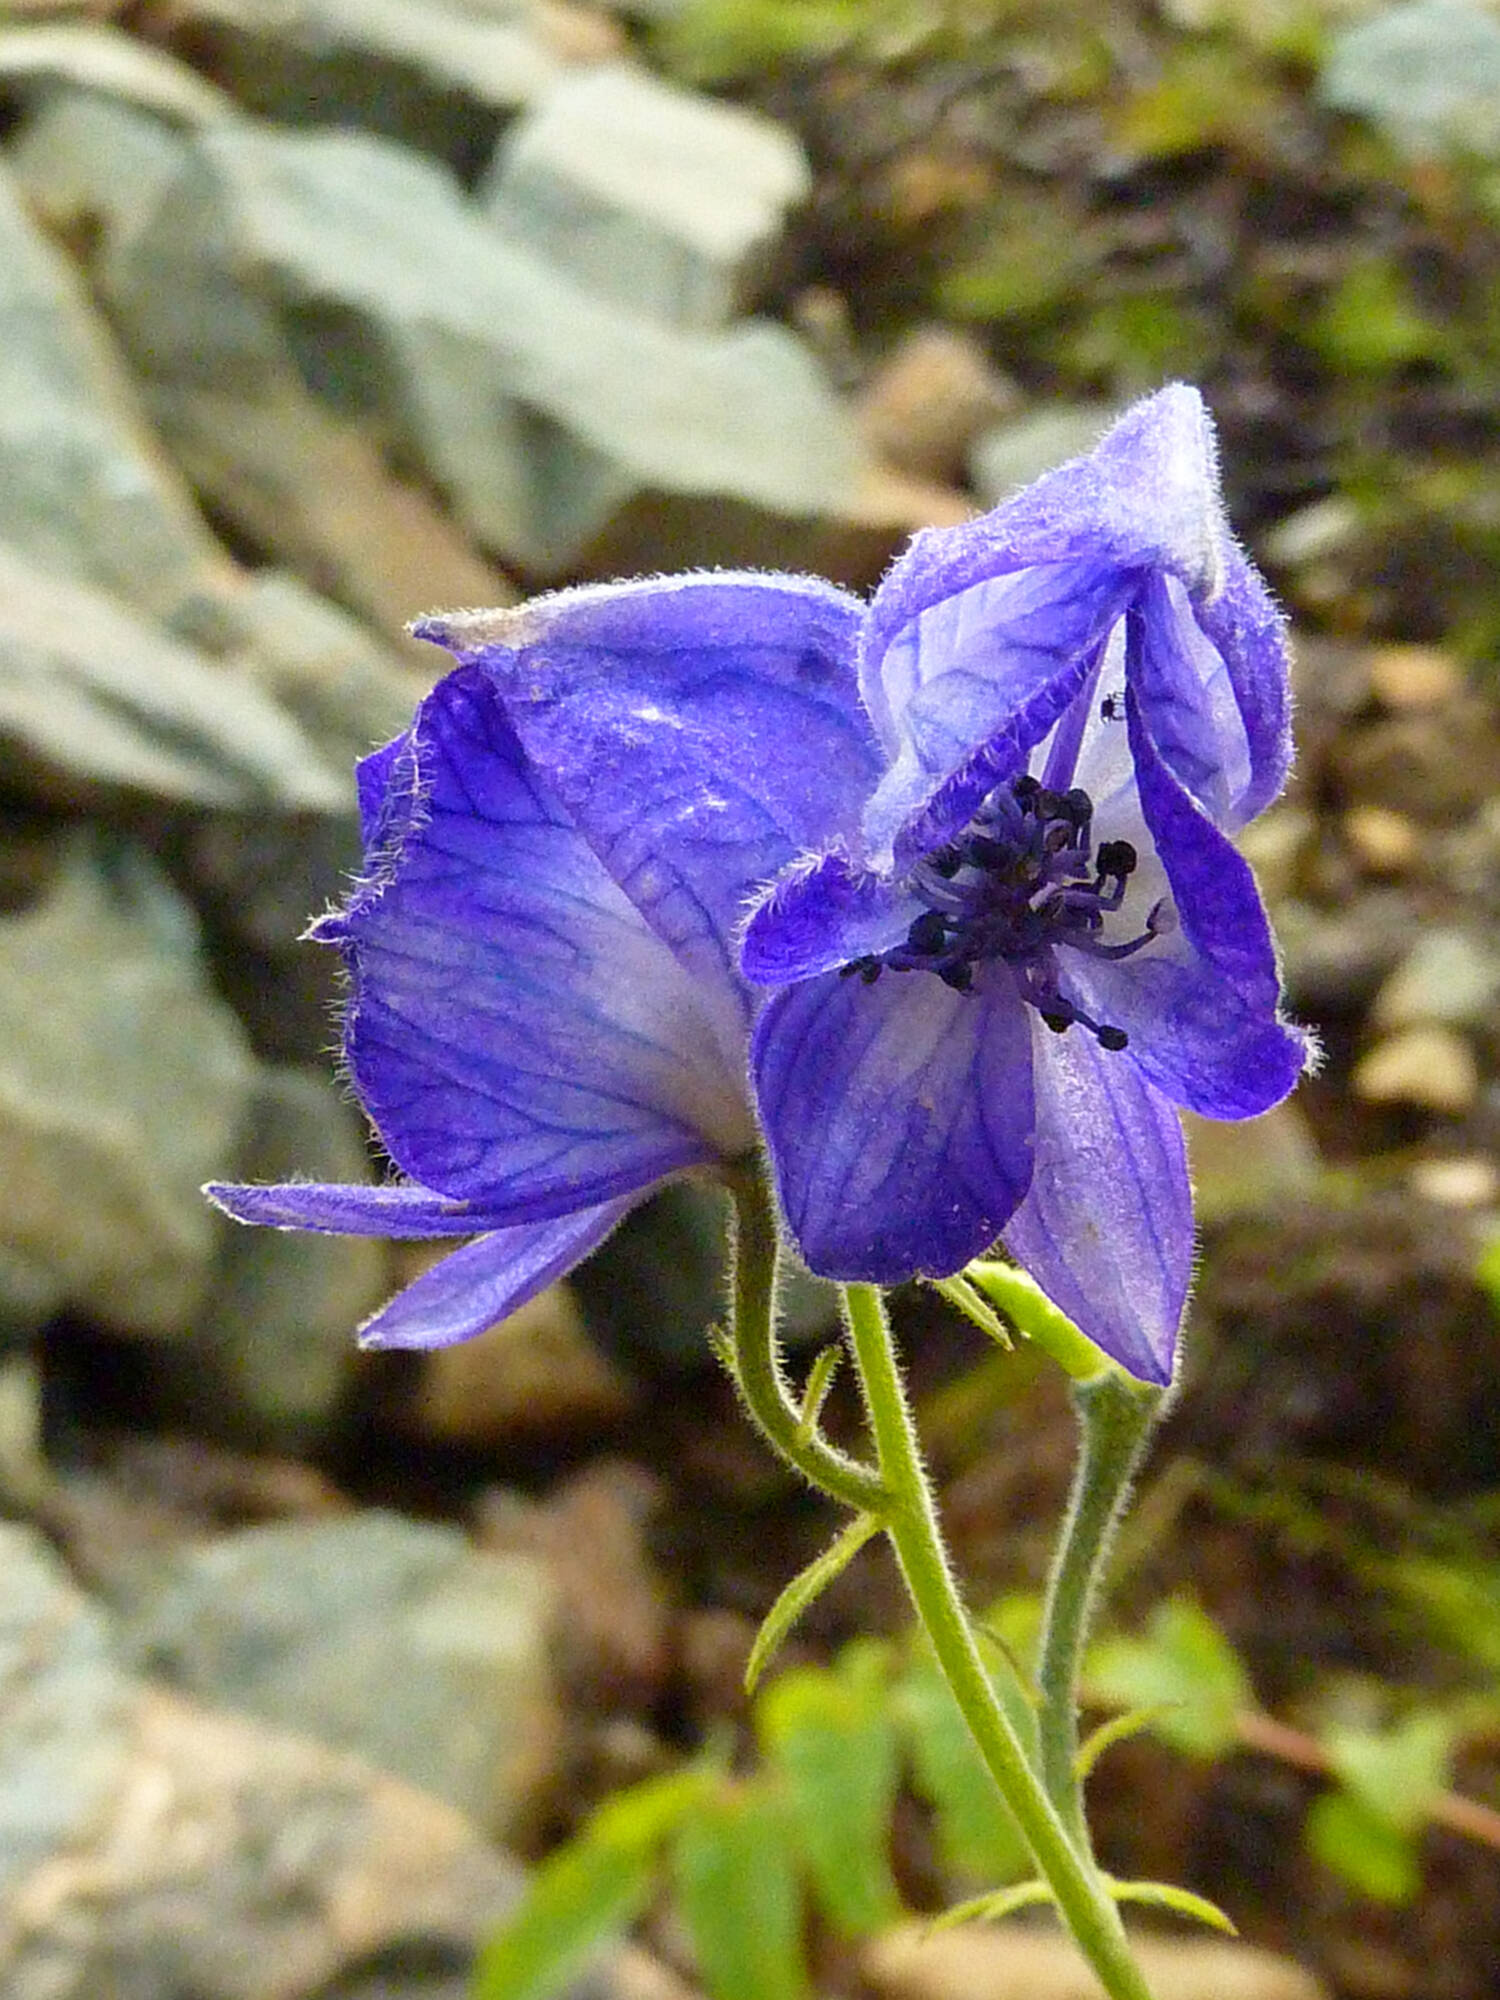 Monkshood (Aconitum) plants are highly toxic to mammals but several kinds of insects feed on them regularly (Courtesy Photo / KM Hocker)